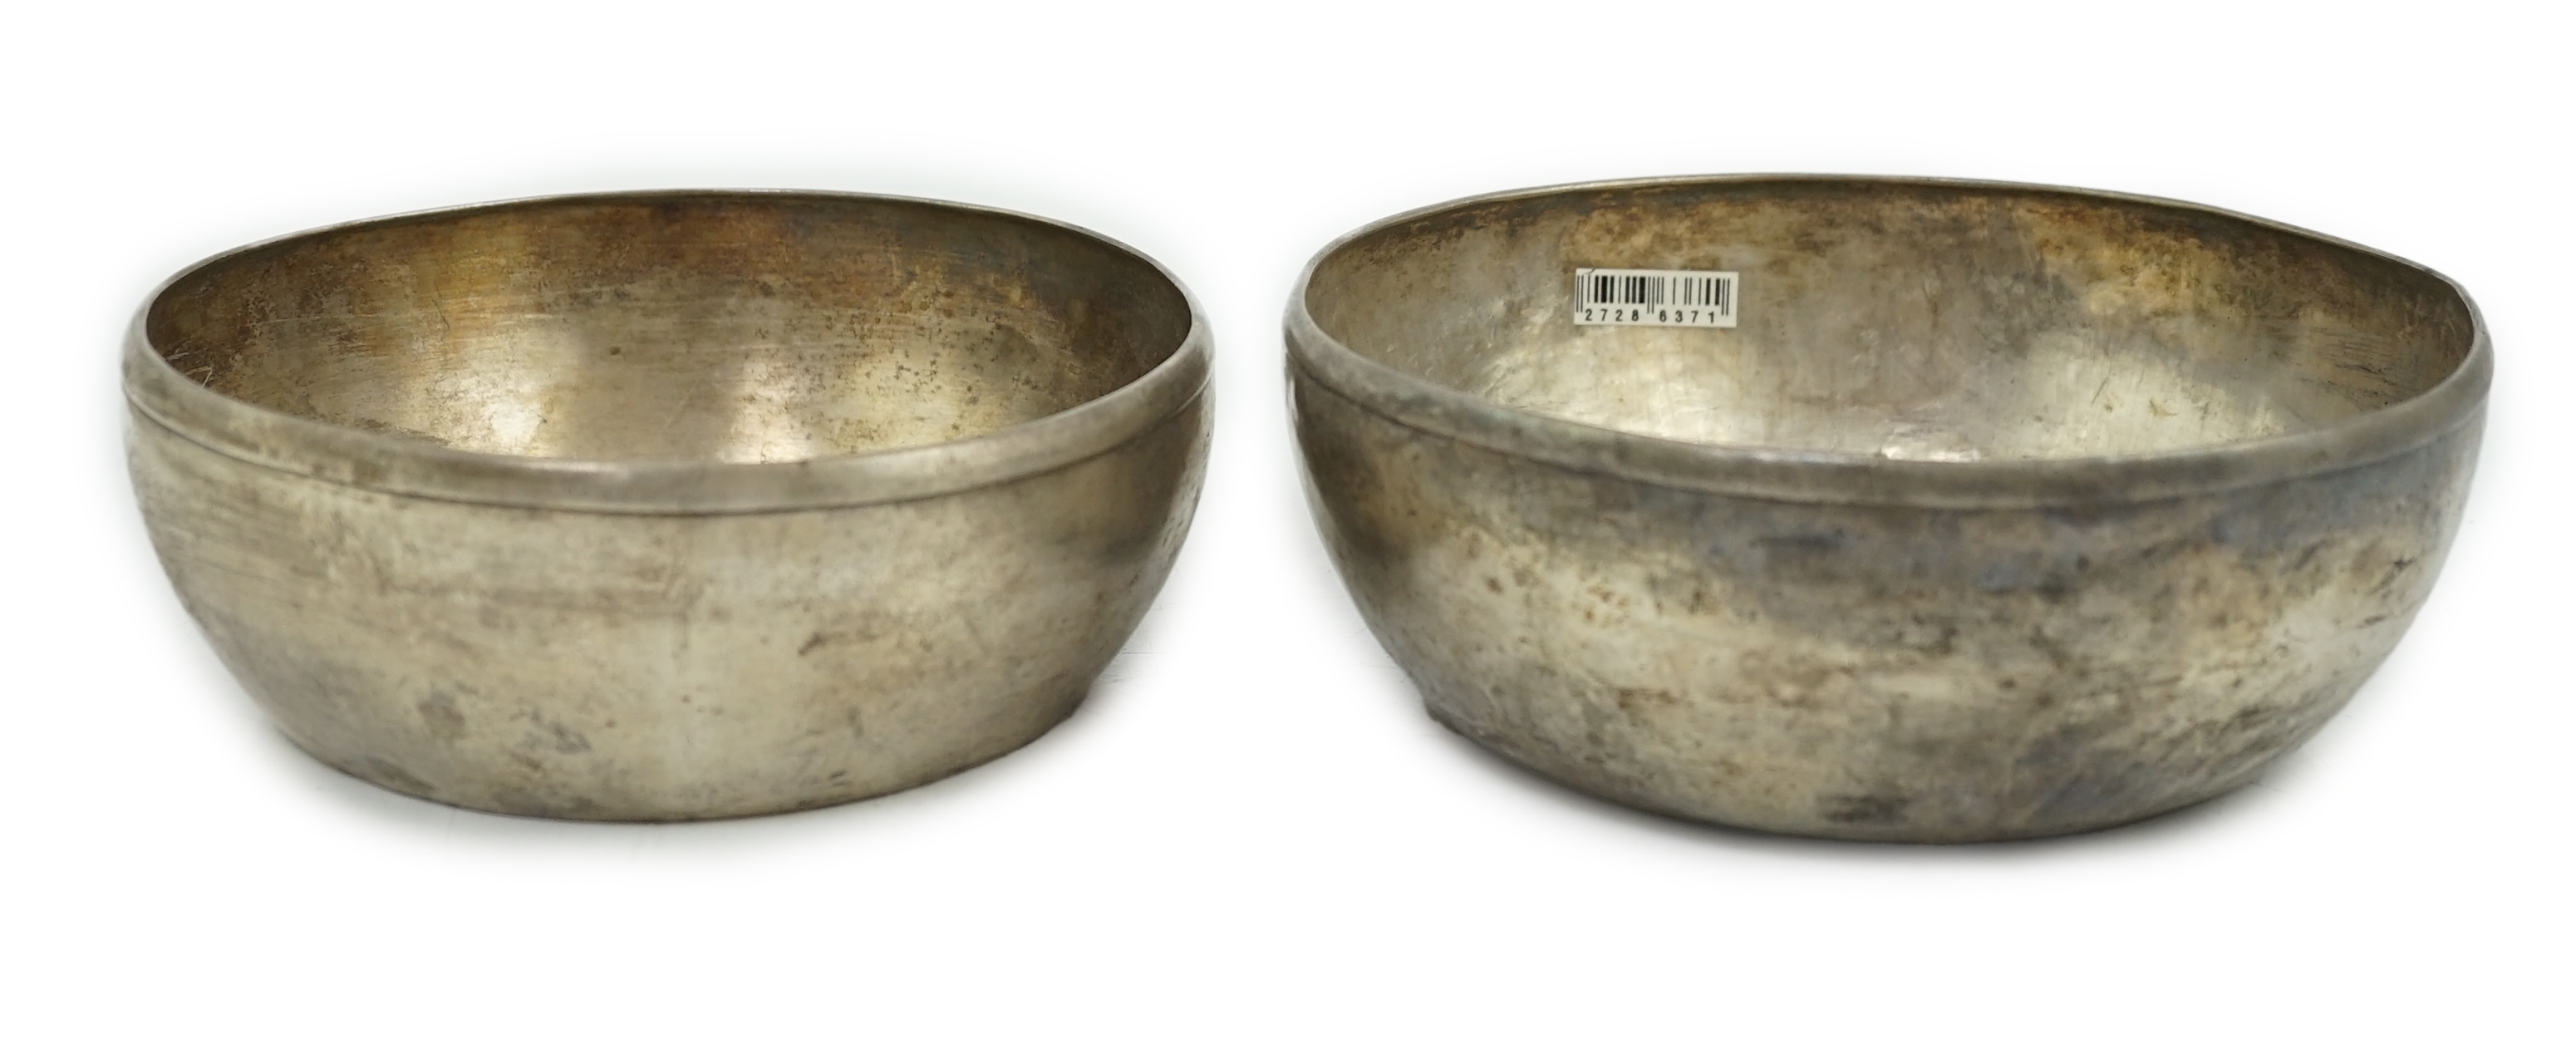 Two silver bowls, Roman or Gandhara, c. late 1st century BC - early 1st century A.D